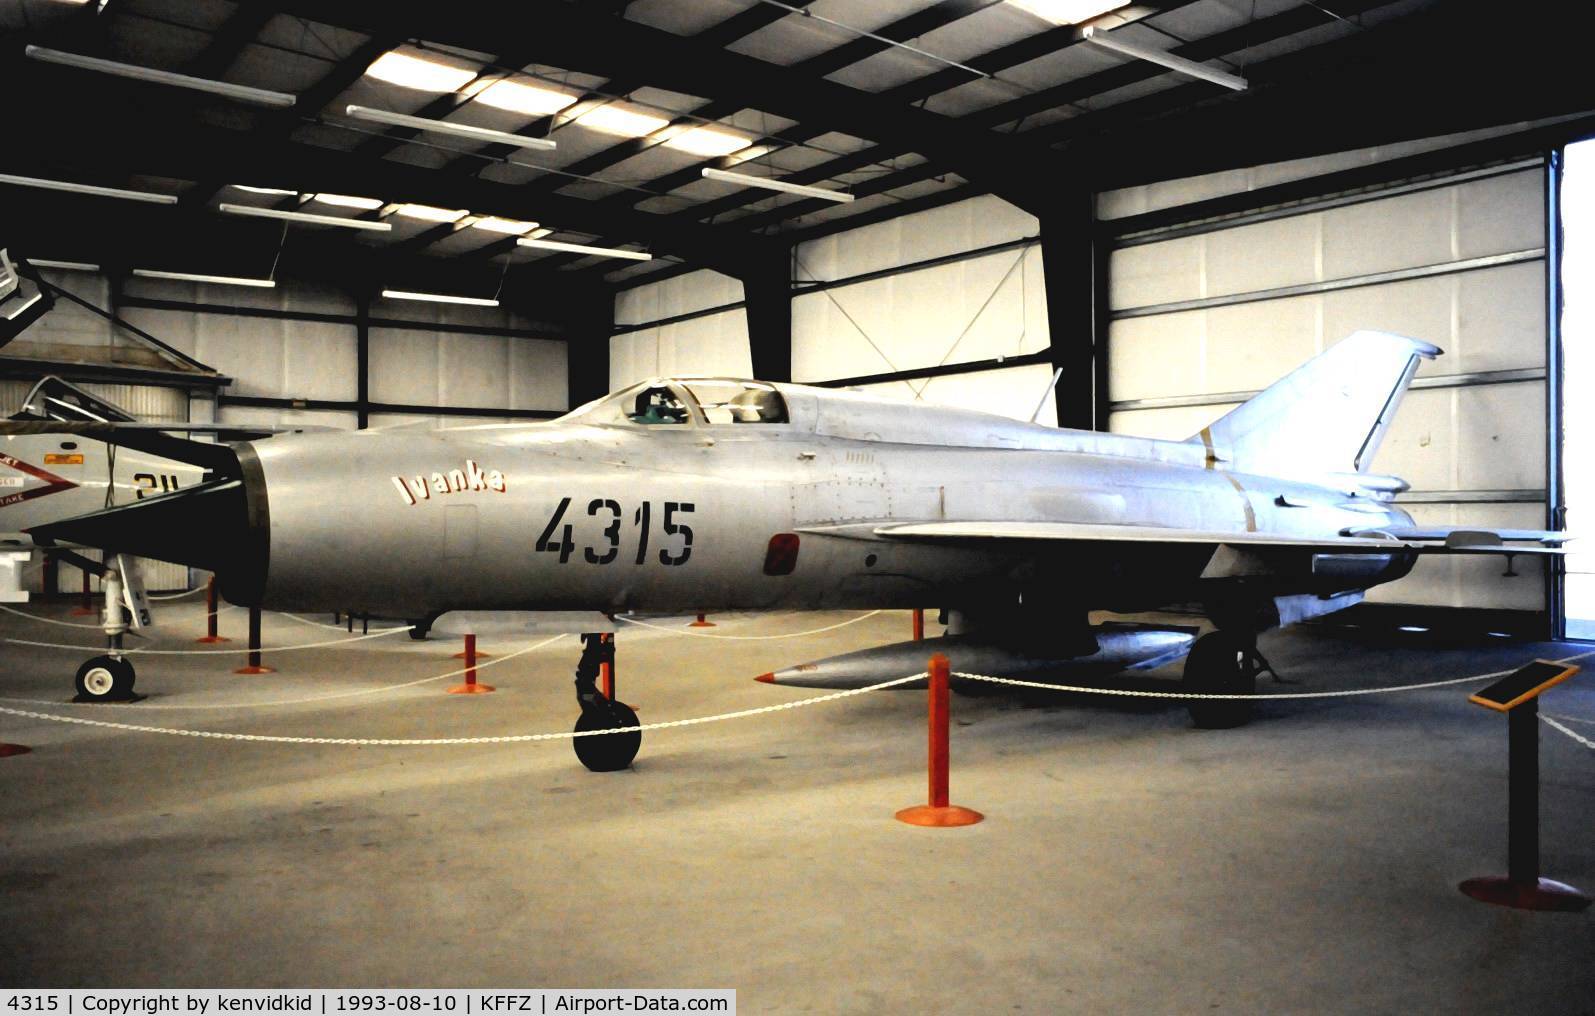 4315, 1966 Mikoyan-Gurevich MiG-21PF C/N 94A4315, At the Champlin Fighter Museum.